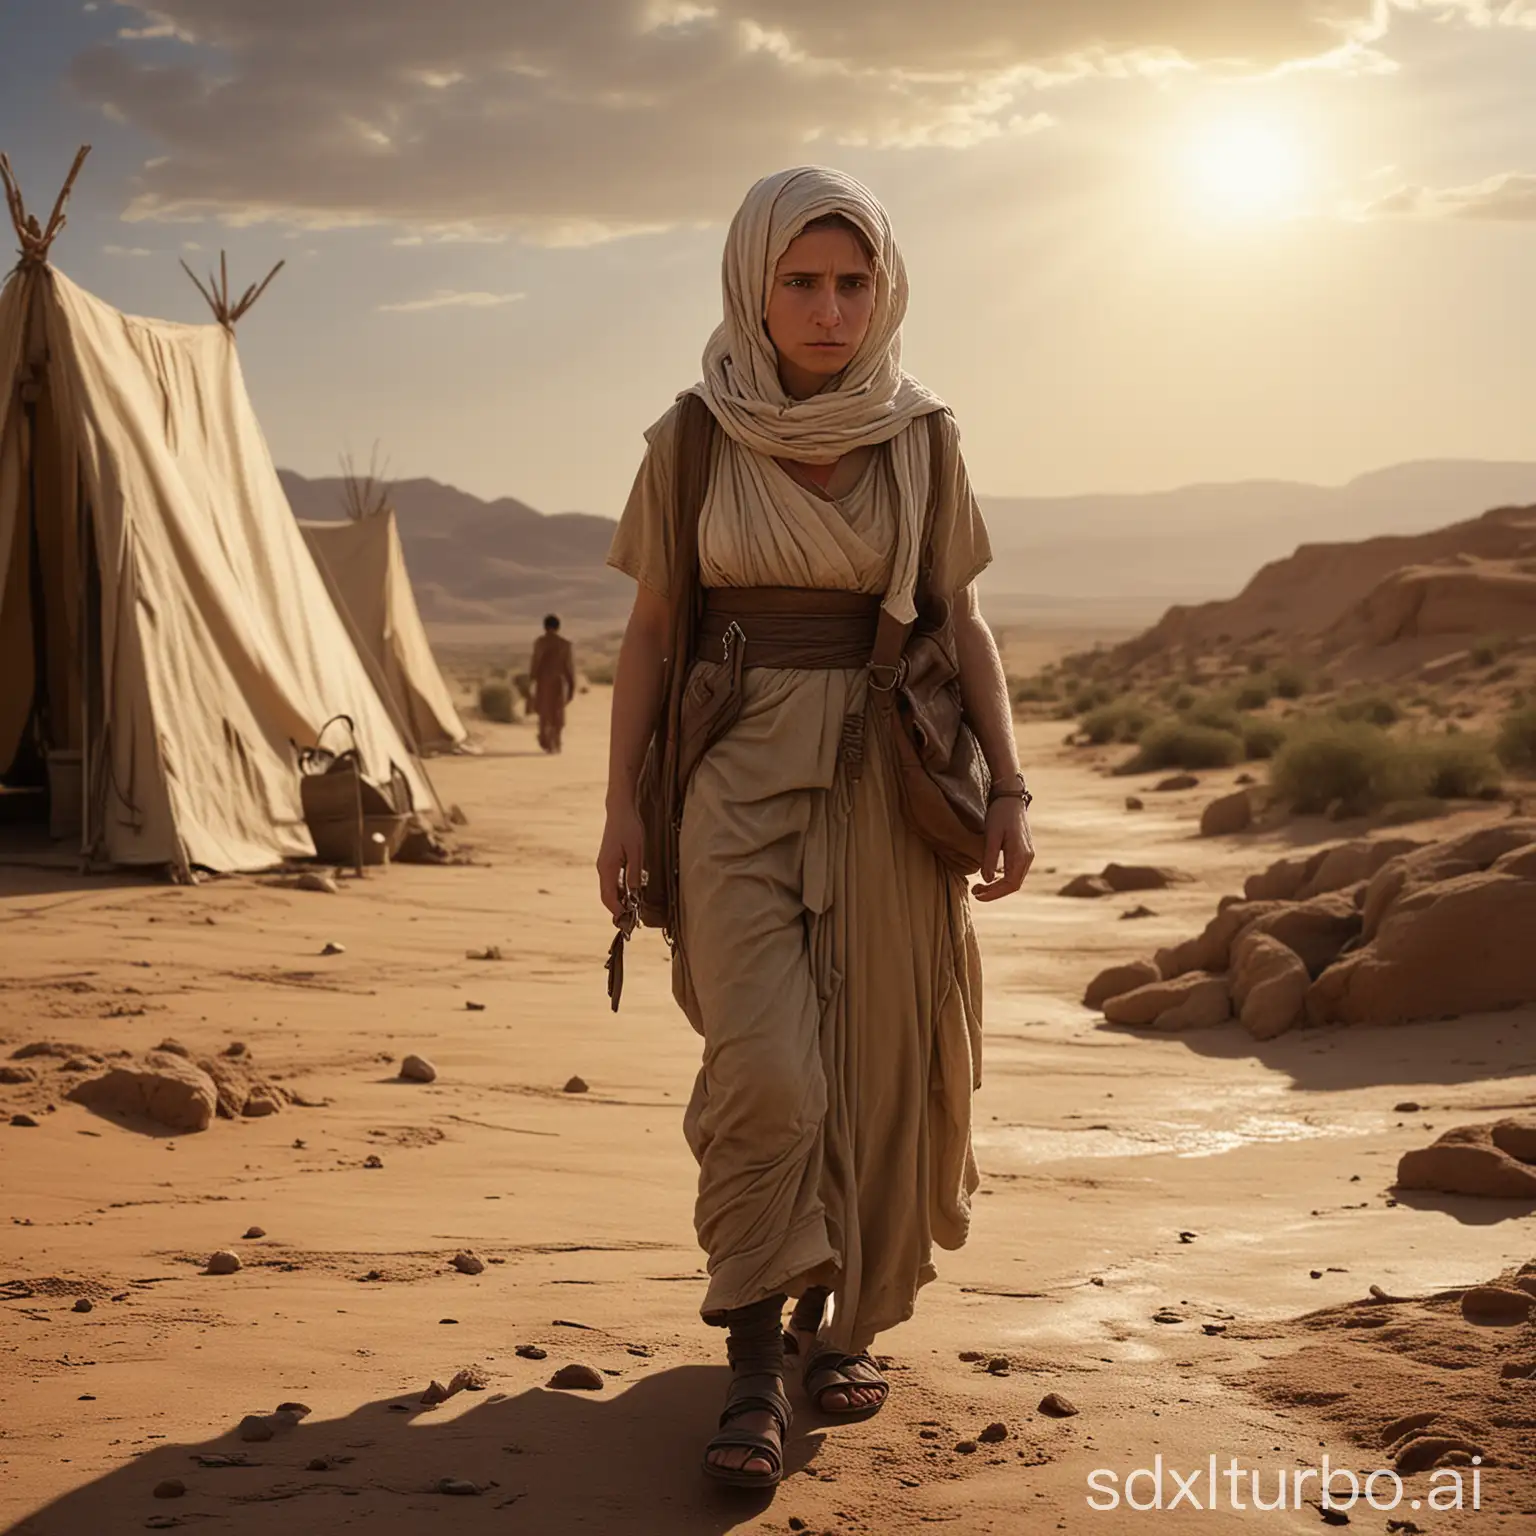 Create a detailed, realistic scene inspired by the Bible story where Abraham sends Hagar and Ishmael away. The scene should be set in a vast, arid desert under a scorching sun. Hagar, a weary but resilient woman, is carrying a small leather water skin, which is almost empty. Ishmael, a young boy, is beside her, looking thirsty and exhausted. Hagar is anxiously searching the horizon for any sign of water. In the background, Abraham can be seen in the distance, standing near a simple tent, looking sorrowful as he watches them leave. The atmosphere should convey a sense of desperation and hope. Use muted earth tones to highlight the harshness of the desert environment.